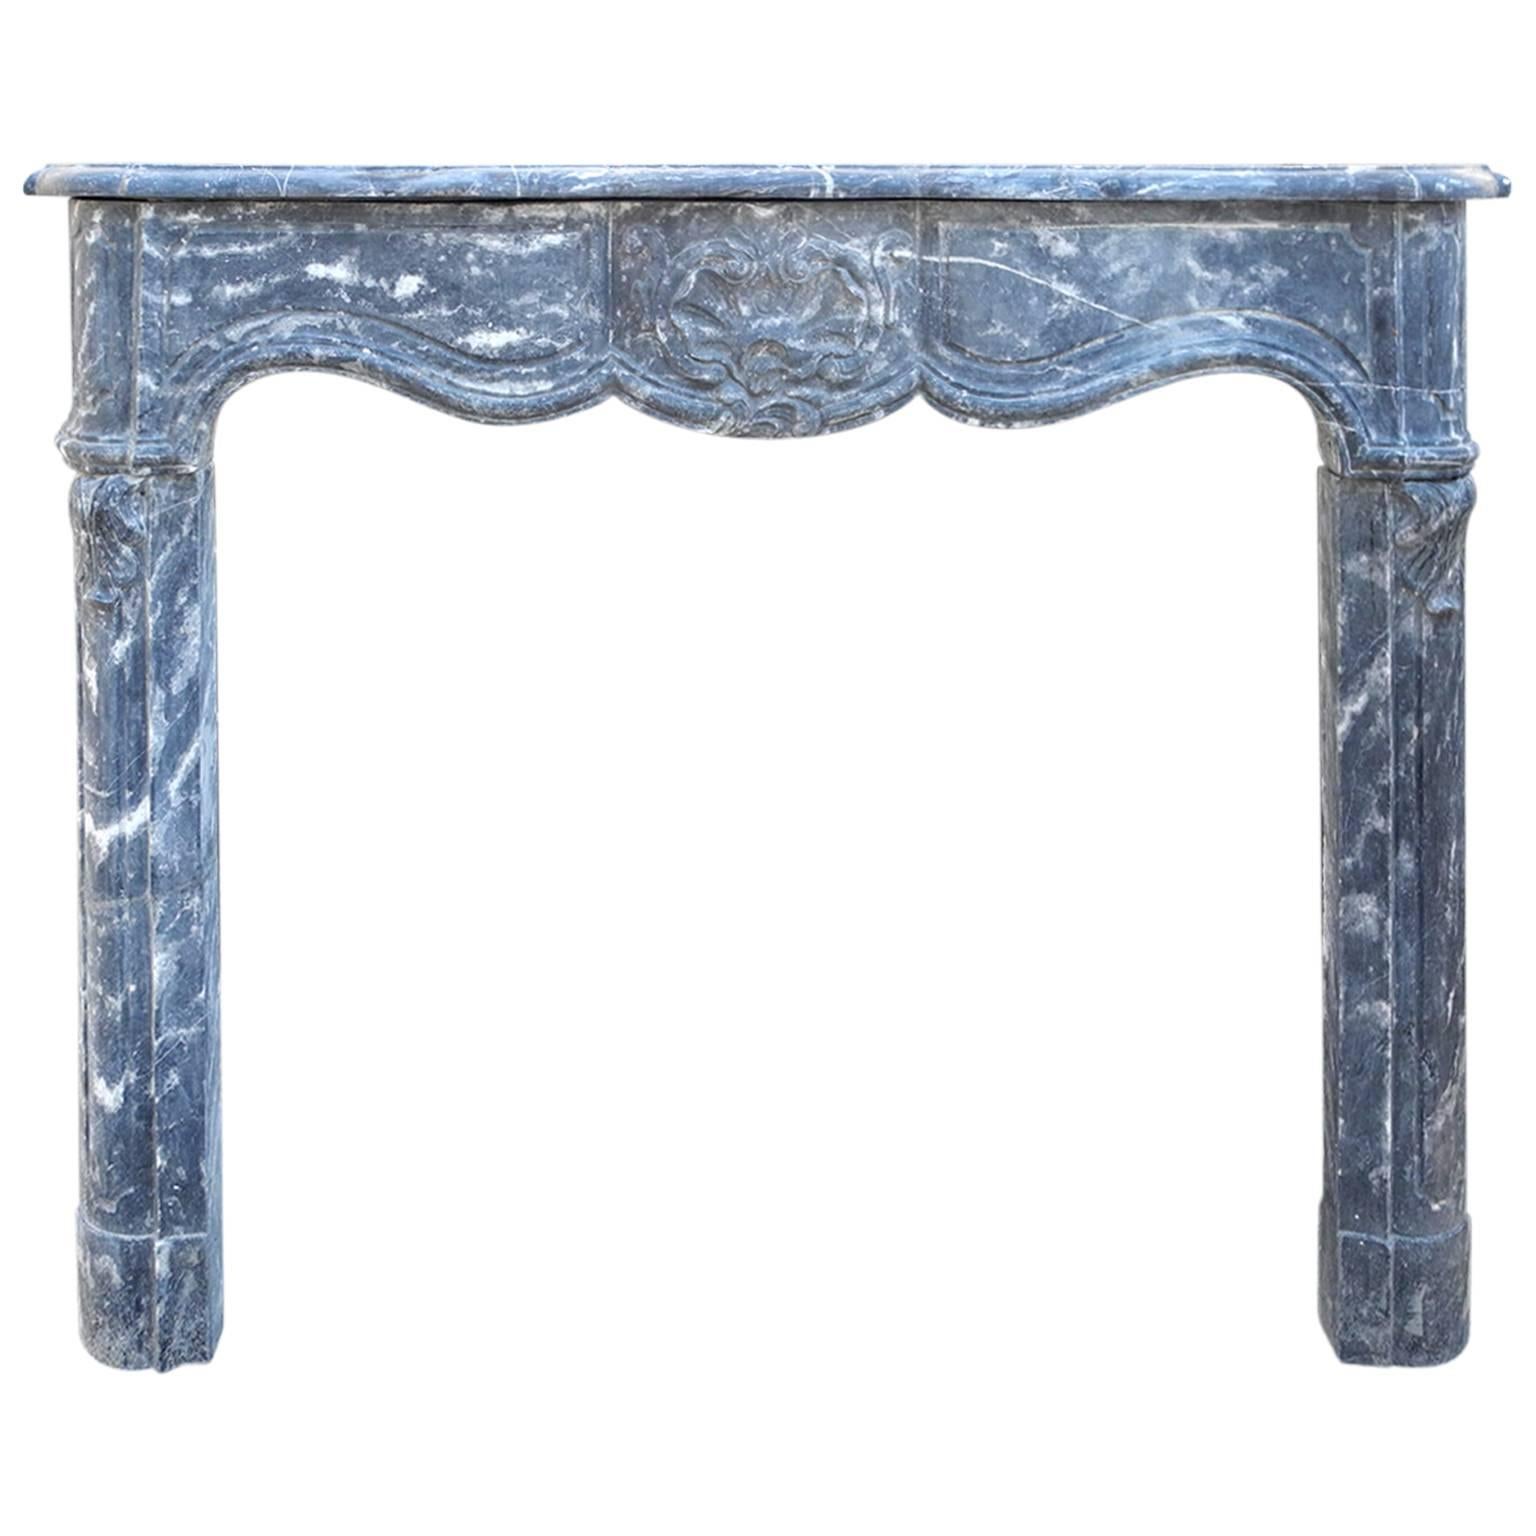 Antique 18th Century Black Marble Mantel from Saint-Marcellin